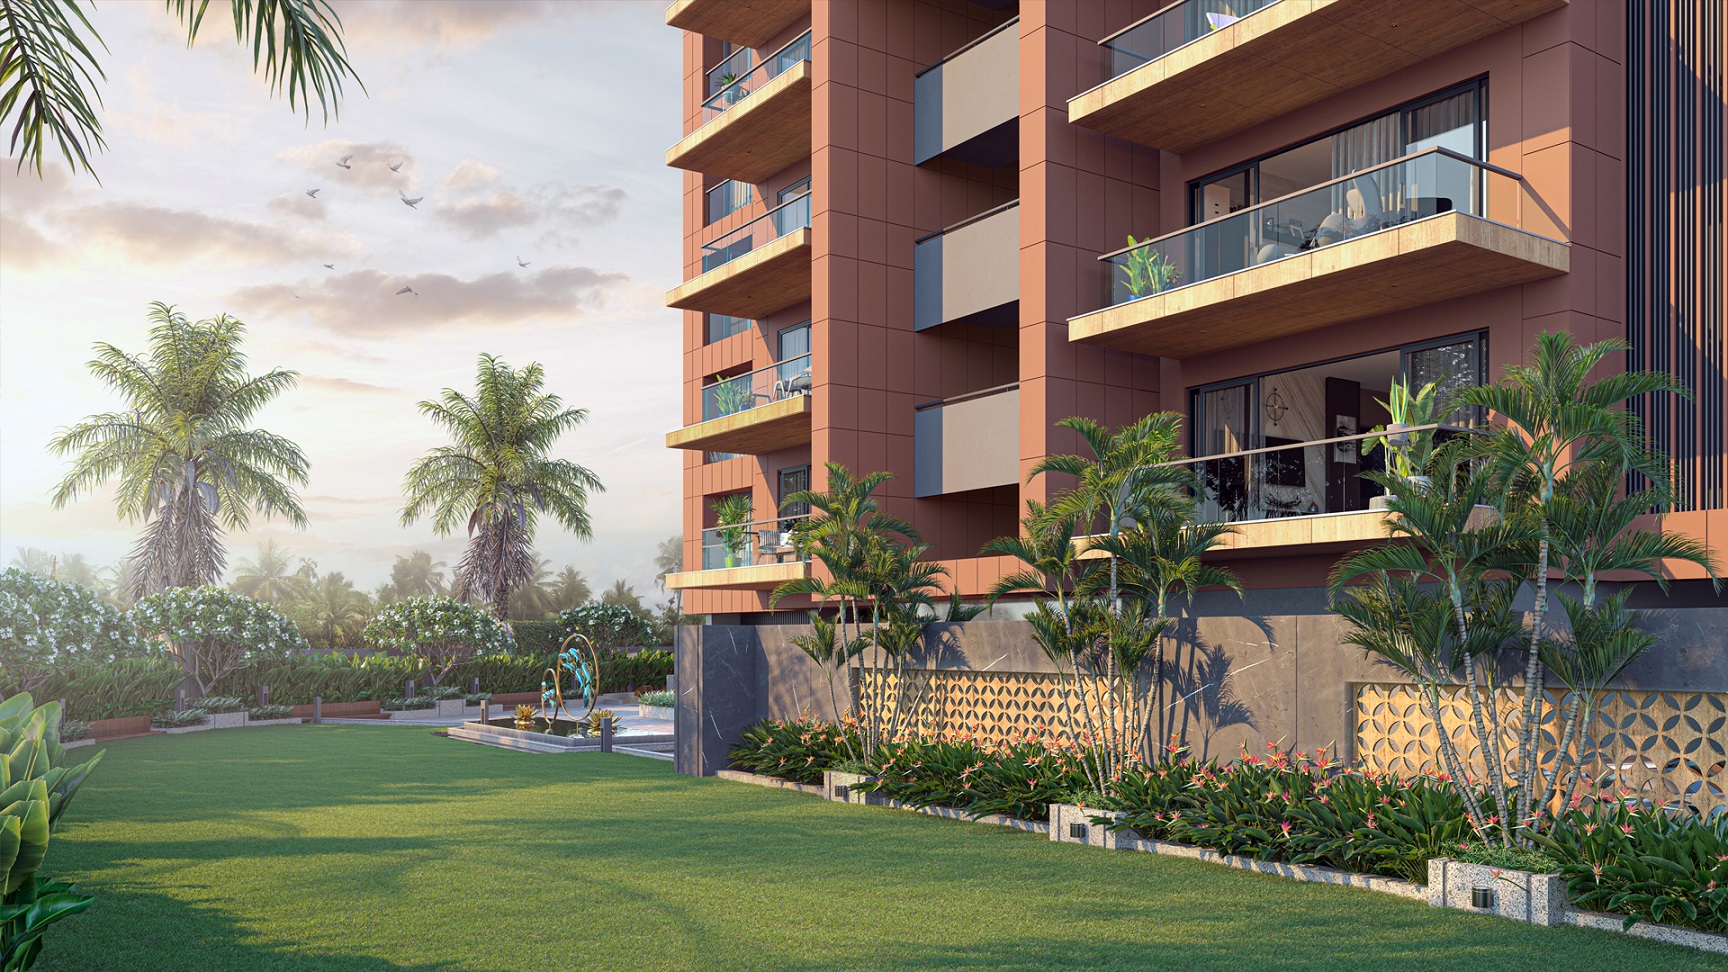 4 BHK apartments in surate